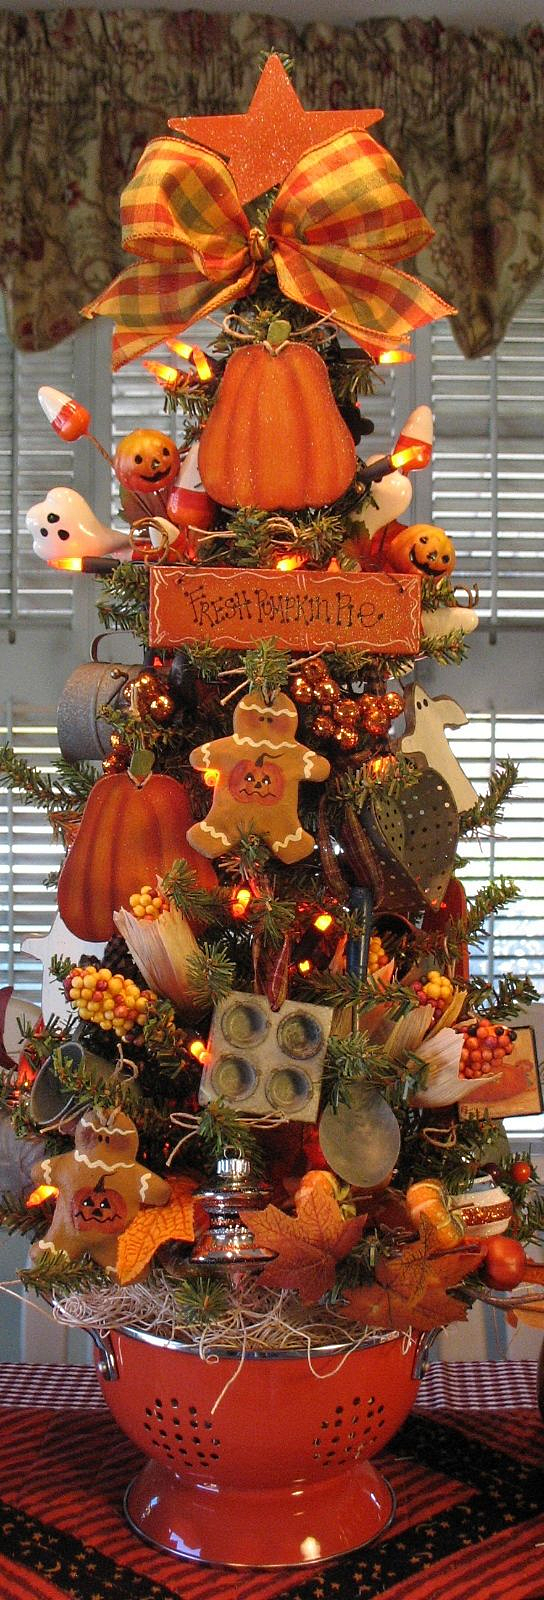 A Fall/Autumn decorated small tabletop Christmas tree